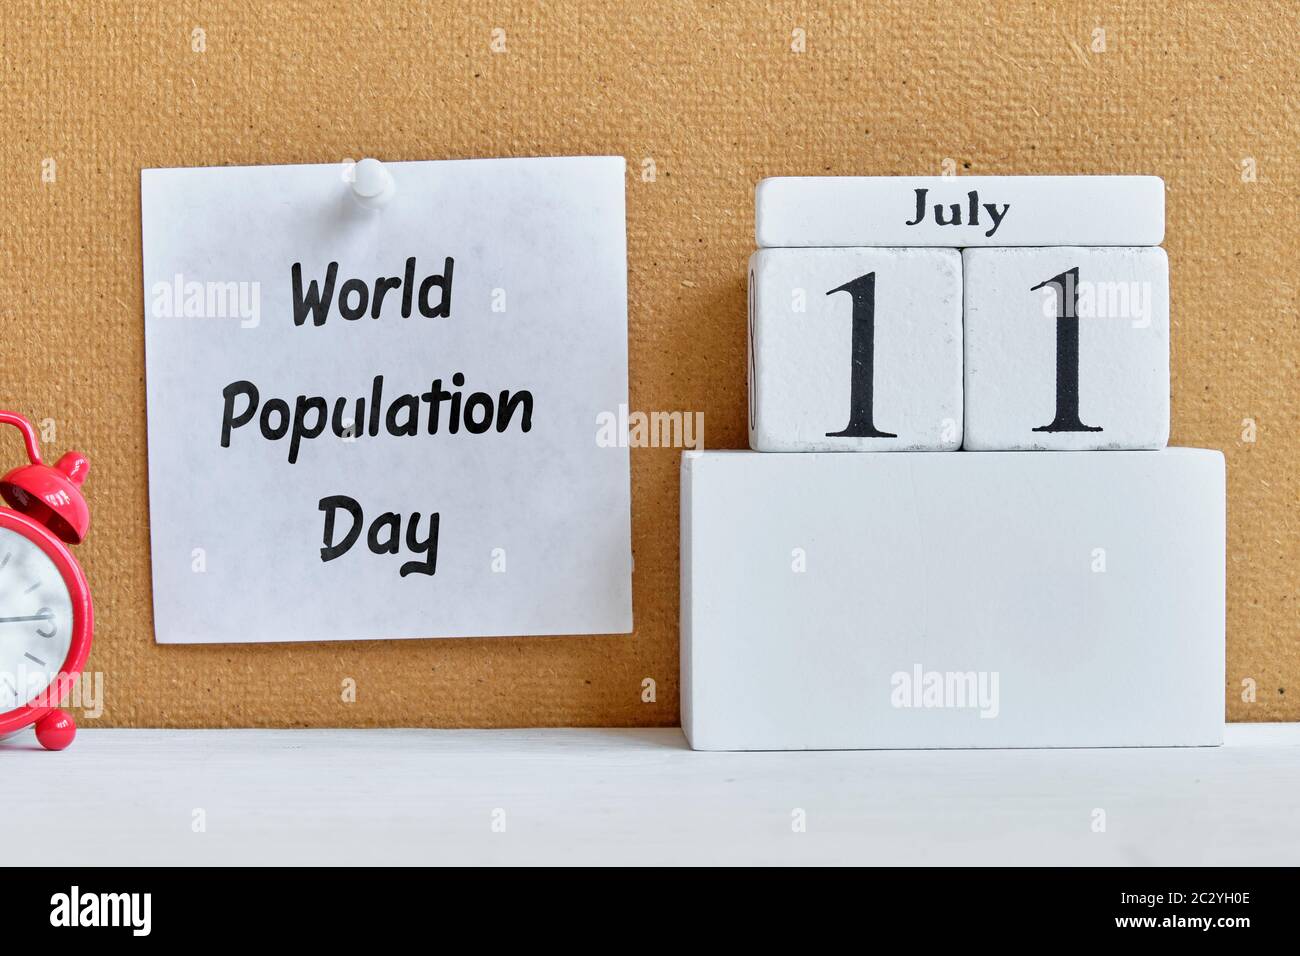 11th july eleventh day month calendar concept World Population Day Stock Photo